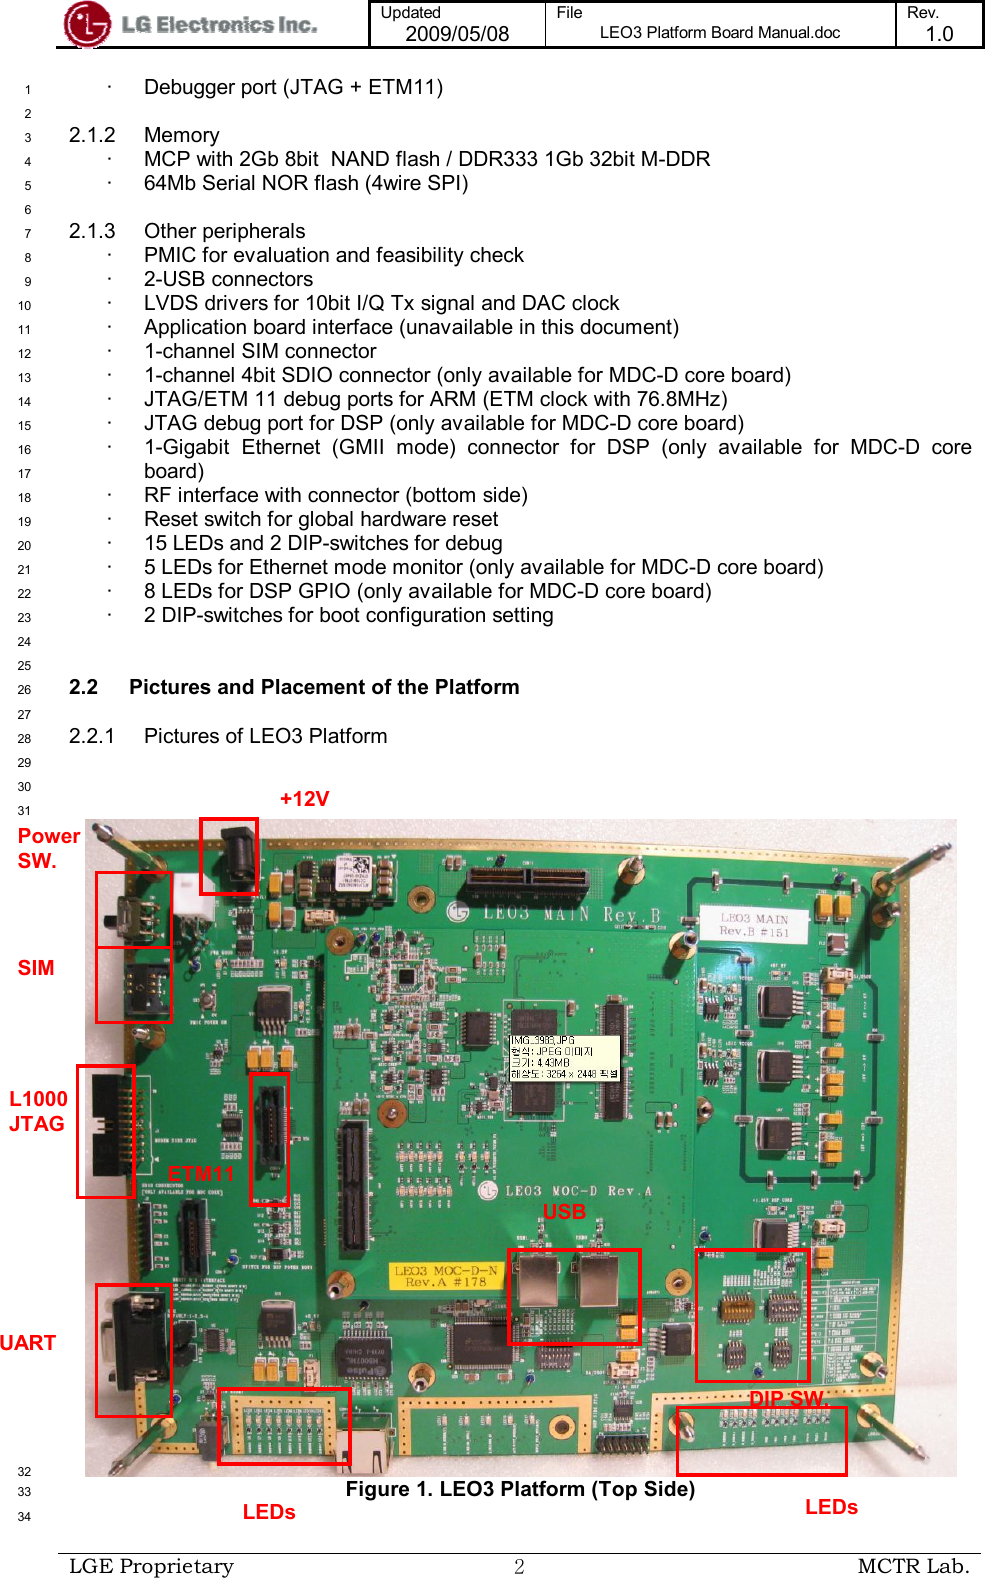  Updated 2009/05/08 File LEO3 Platform Board Manual.doc Rev. 1.0   LGE Proprietary  ２ MCTR Lab.  ·  Debugger port (JTAG + ETM11) 1  2 2.1.2  Memory 3 ·  MCP with 2Gb 8bit  NAND flash / DDR333 1Gb 32bit M-DDR 4 ·  64Mb Serial NOR flash (4wire SPI) 5  6 2.1.3  Other peripherals 7 ·  PMIC for evaluation and feasibility check 8 ·  2-USB connectors 9 ·  LVDS drivers for 10bit I/Q Tx signal and DAC clock 10 ·  Application board interface (unavailable in this document) 11 ·  1-channel SIM connector 12 ·  1-channel 4bit SDIO connector (only available for MDC-D core board) 13 ·  JTAG/ETM 11 debug ports for ARM (ETM clock with 76.8MHz) 14 ·  JTAG debug port for DSP (only available for MDC-D core board) 15 ·  1-Gigabit  Ethernet  (GMII  mode)  connector  for  DSP  (only  available  for  MDC-D  core 16 board) 17 ·  RF interface with connector (bottom side) 18 ·  Reset switch for global hardware reset 19 ·  15 LEDs and 2 DIP-switches for debug 20 ·  5 LEDs for Ethernet mode monitor (only available for MDC-D core board) 21 ·  8 LEDs for DSP GPIO (only available for MDC-D core board) 22 ·  2 DIP-switches for boot configuration setting 23  24  25 2.2  Pictures and Placement of the Platform 26  27 2.2.1  Pictures of LEO3 Platform  28  29  30  31  32 Figure 1. LEO3 Platform (Top Side) 33  34 +12V Power SW. SIM L1000 JTAG UART USB ETM11 LEDs DIP SW. LEDs 